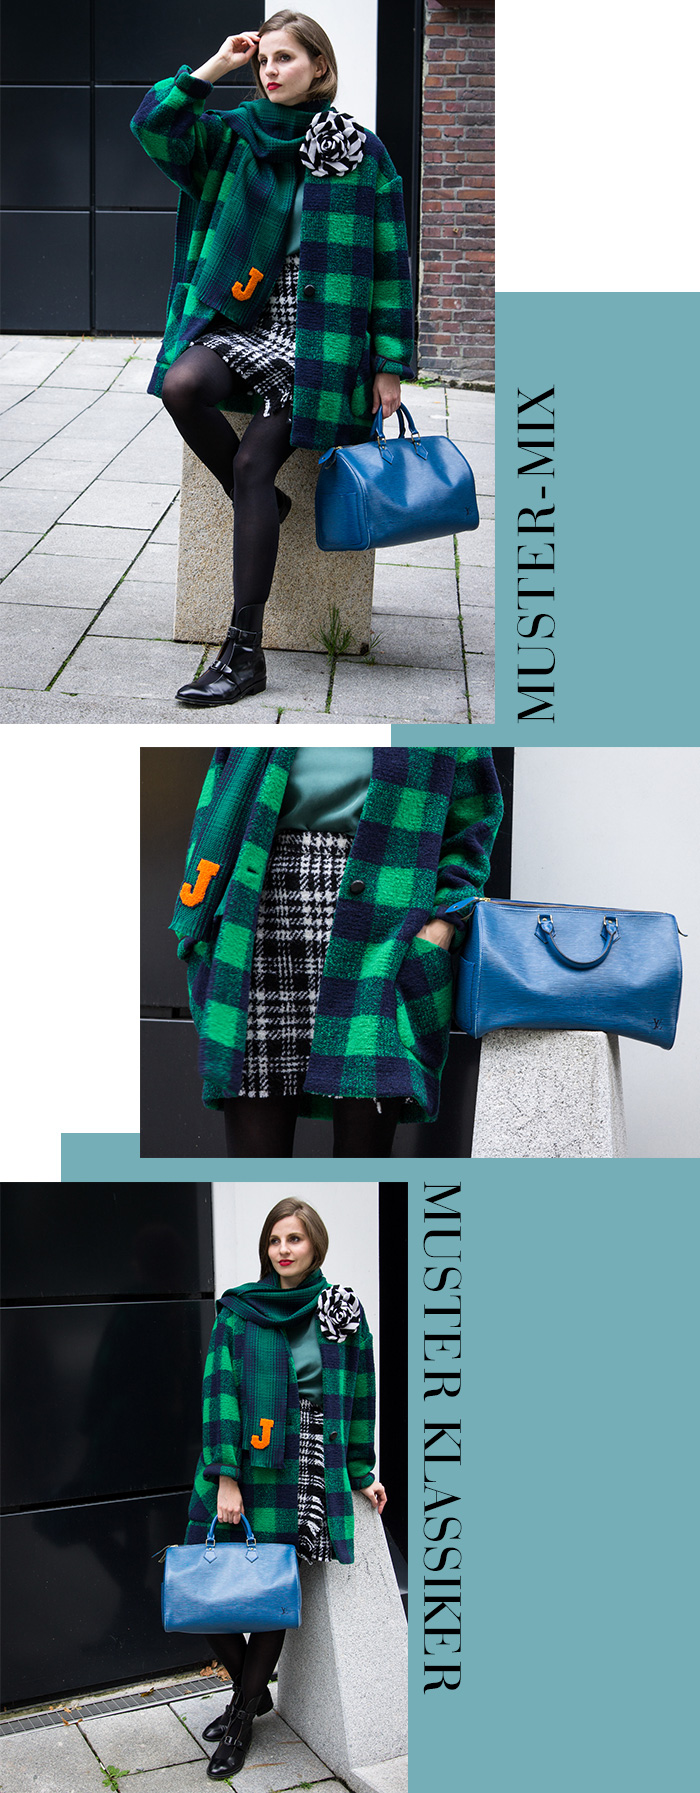 New Arrivals for Autumn - Herbstmode 2017 - Muster Mix